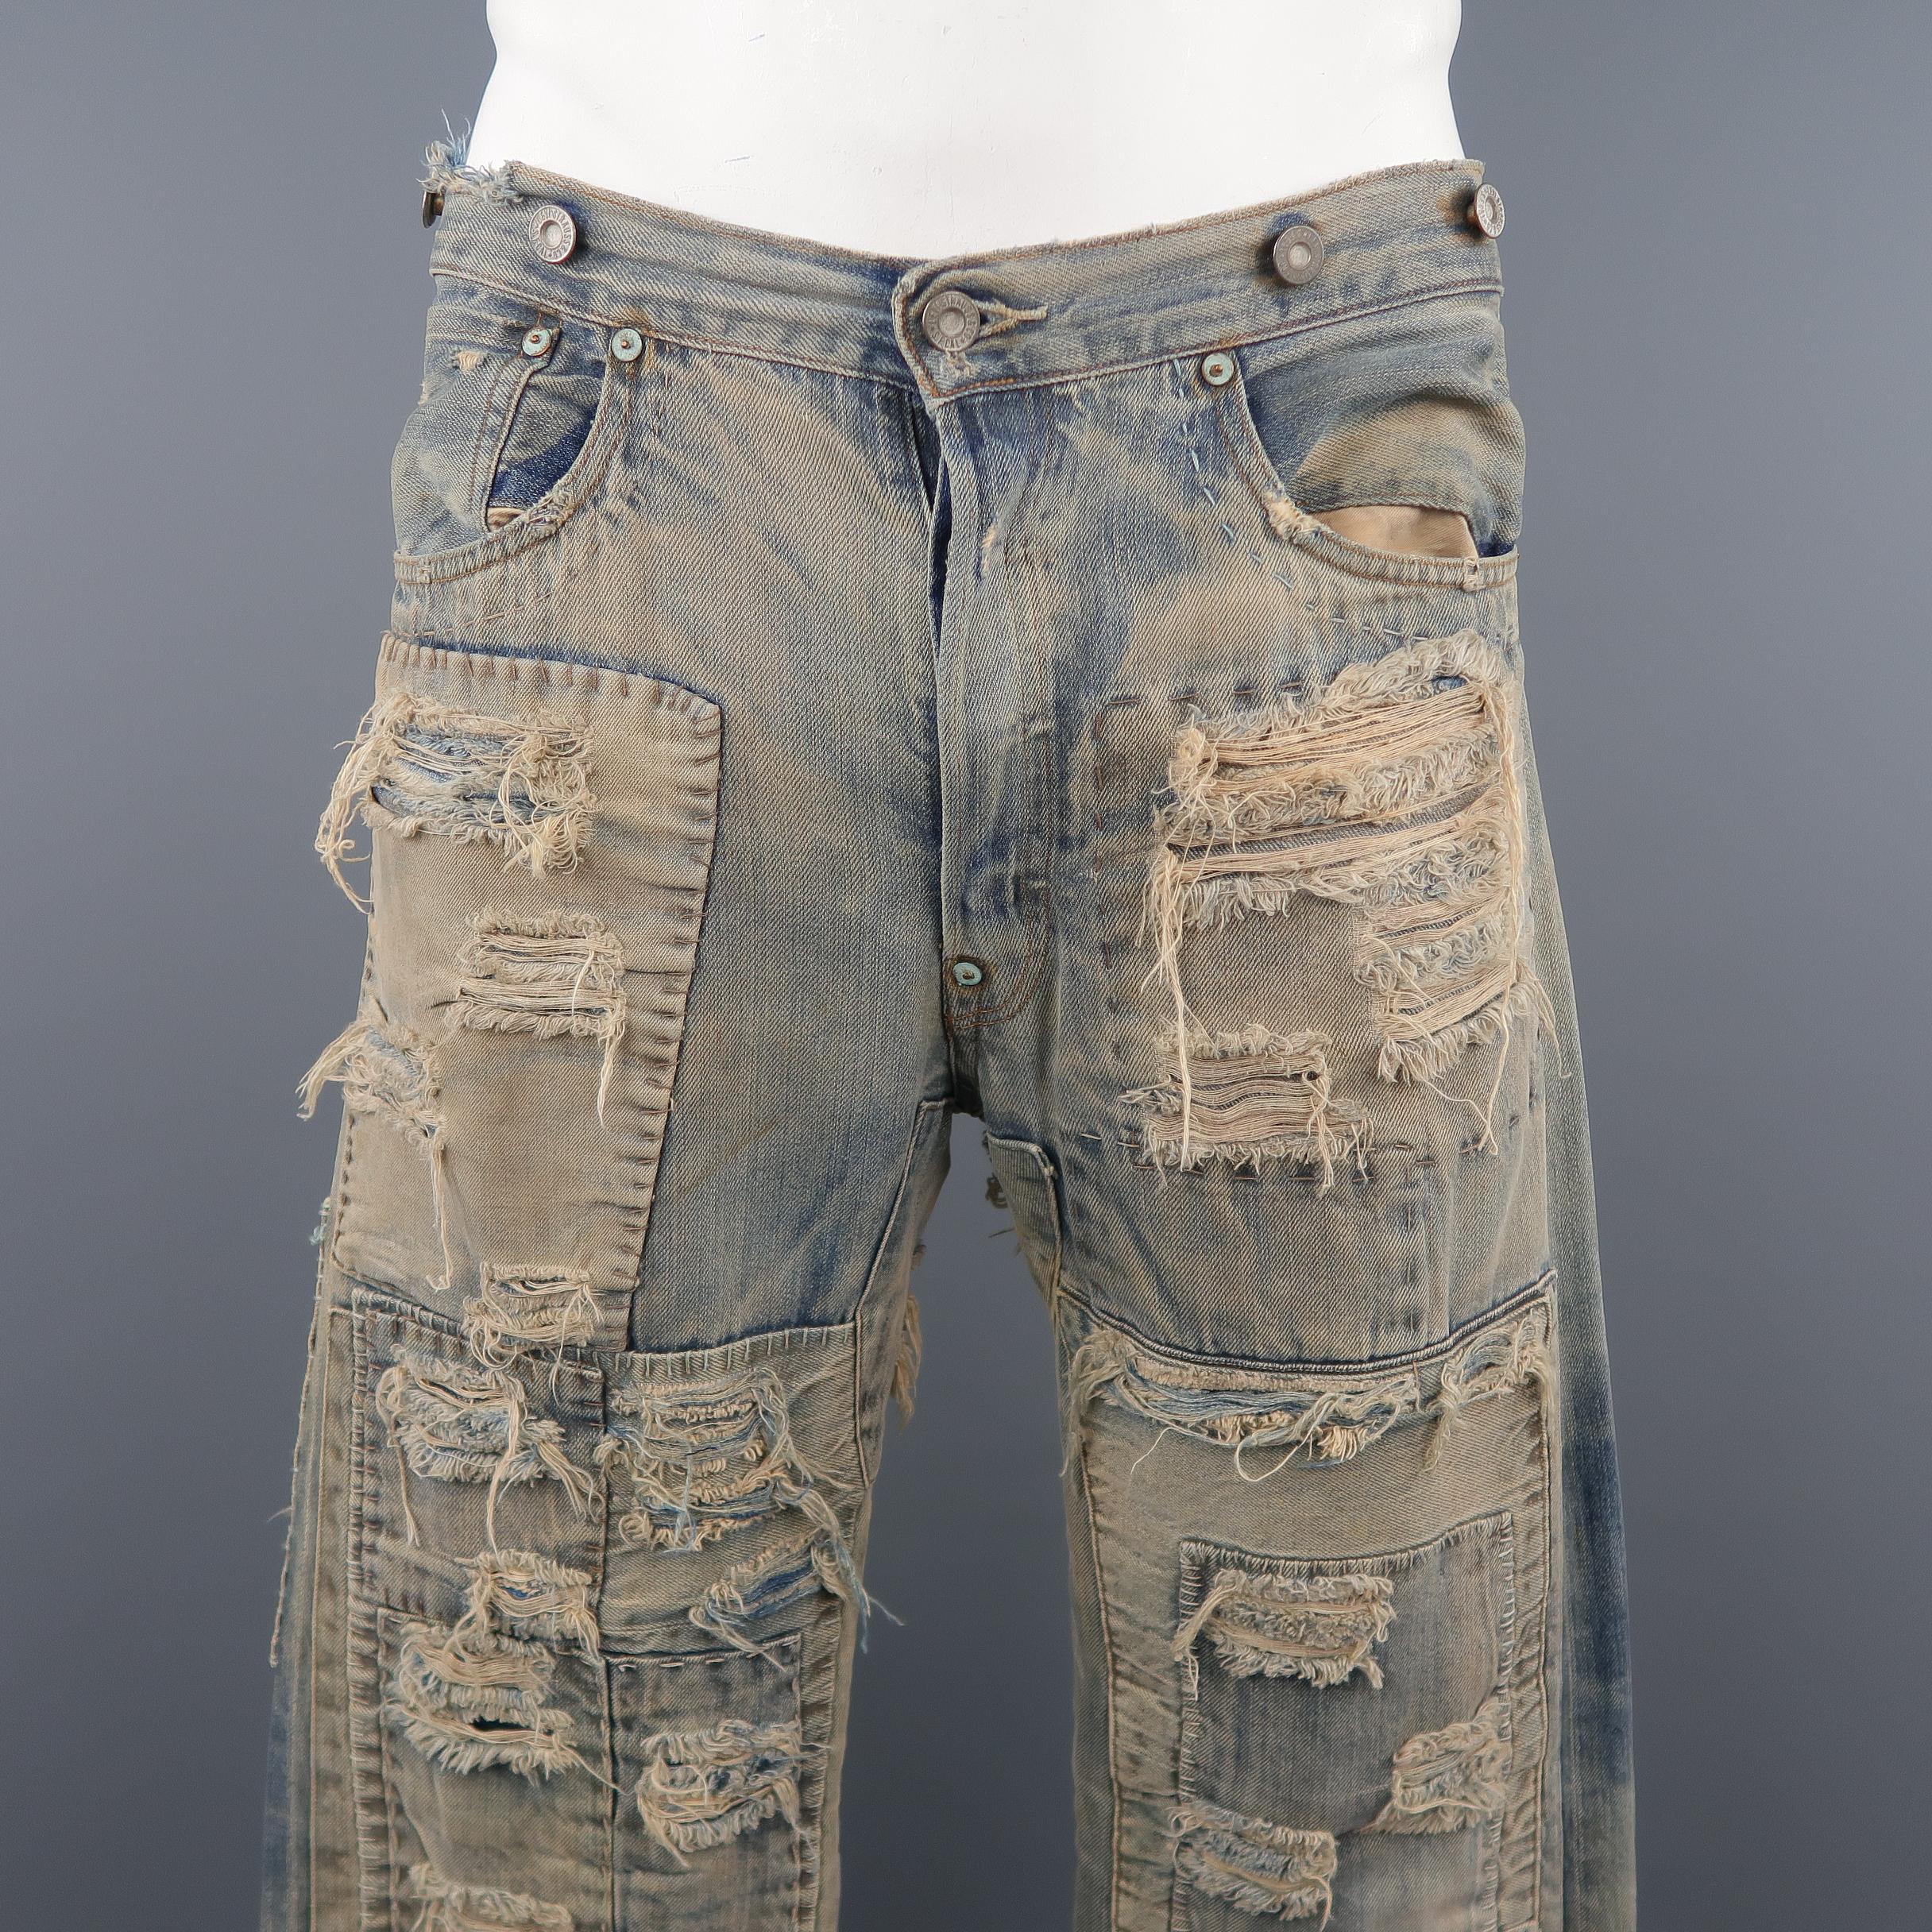 LEVI' S VINTAGE jeans come in light dirty washed denim with all over patchwork and destroyed distressing details. Tear in back. As-is. Made in USA.
 
Good Pre-Owned Condition.
Marked: (no size)
 
Measurements:
 
Waist: 34 in.
Rise: 12 in.
Inseam: 36